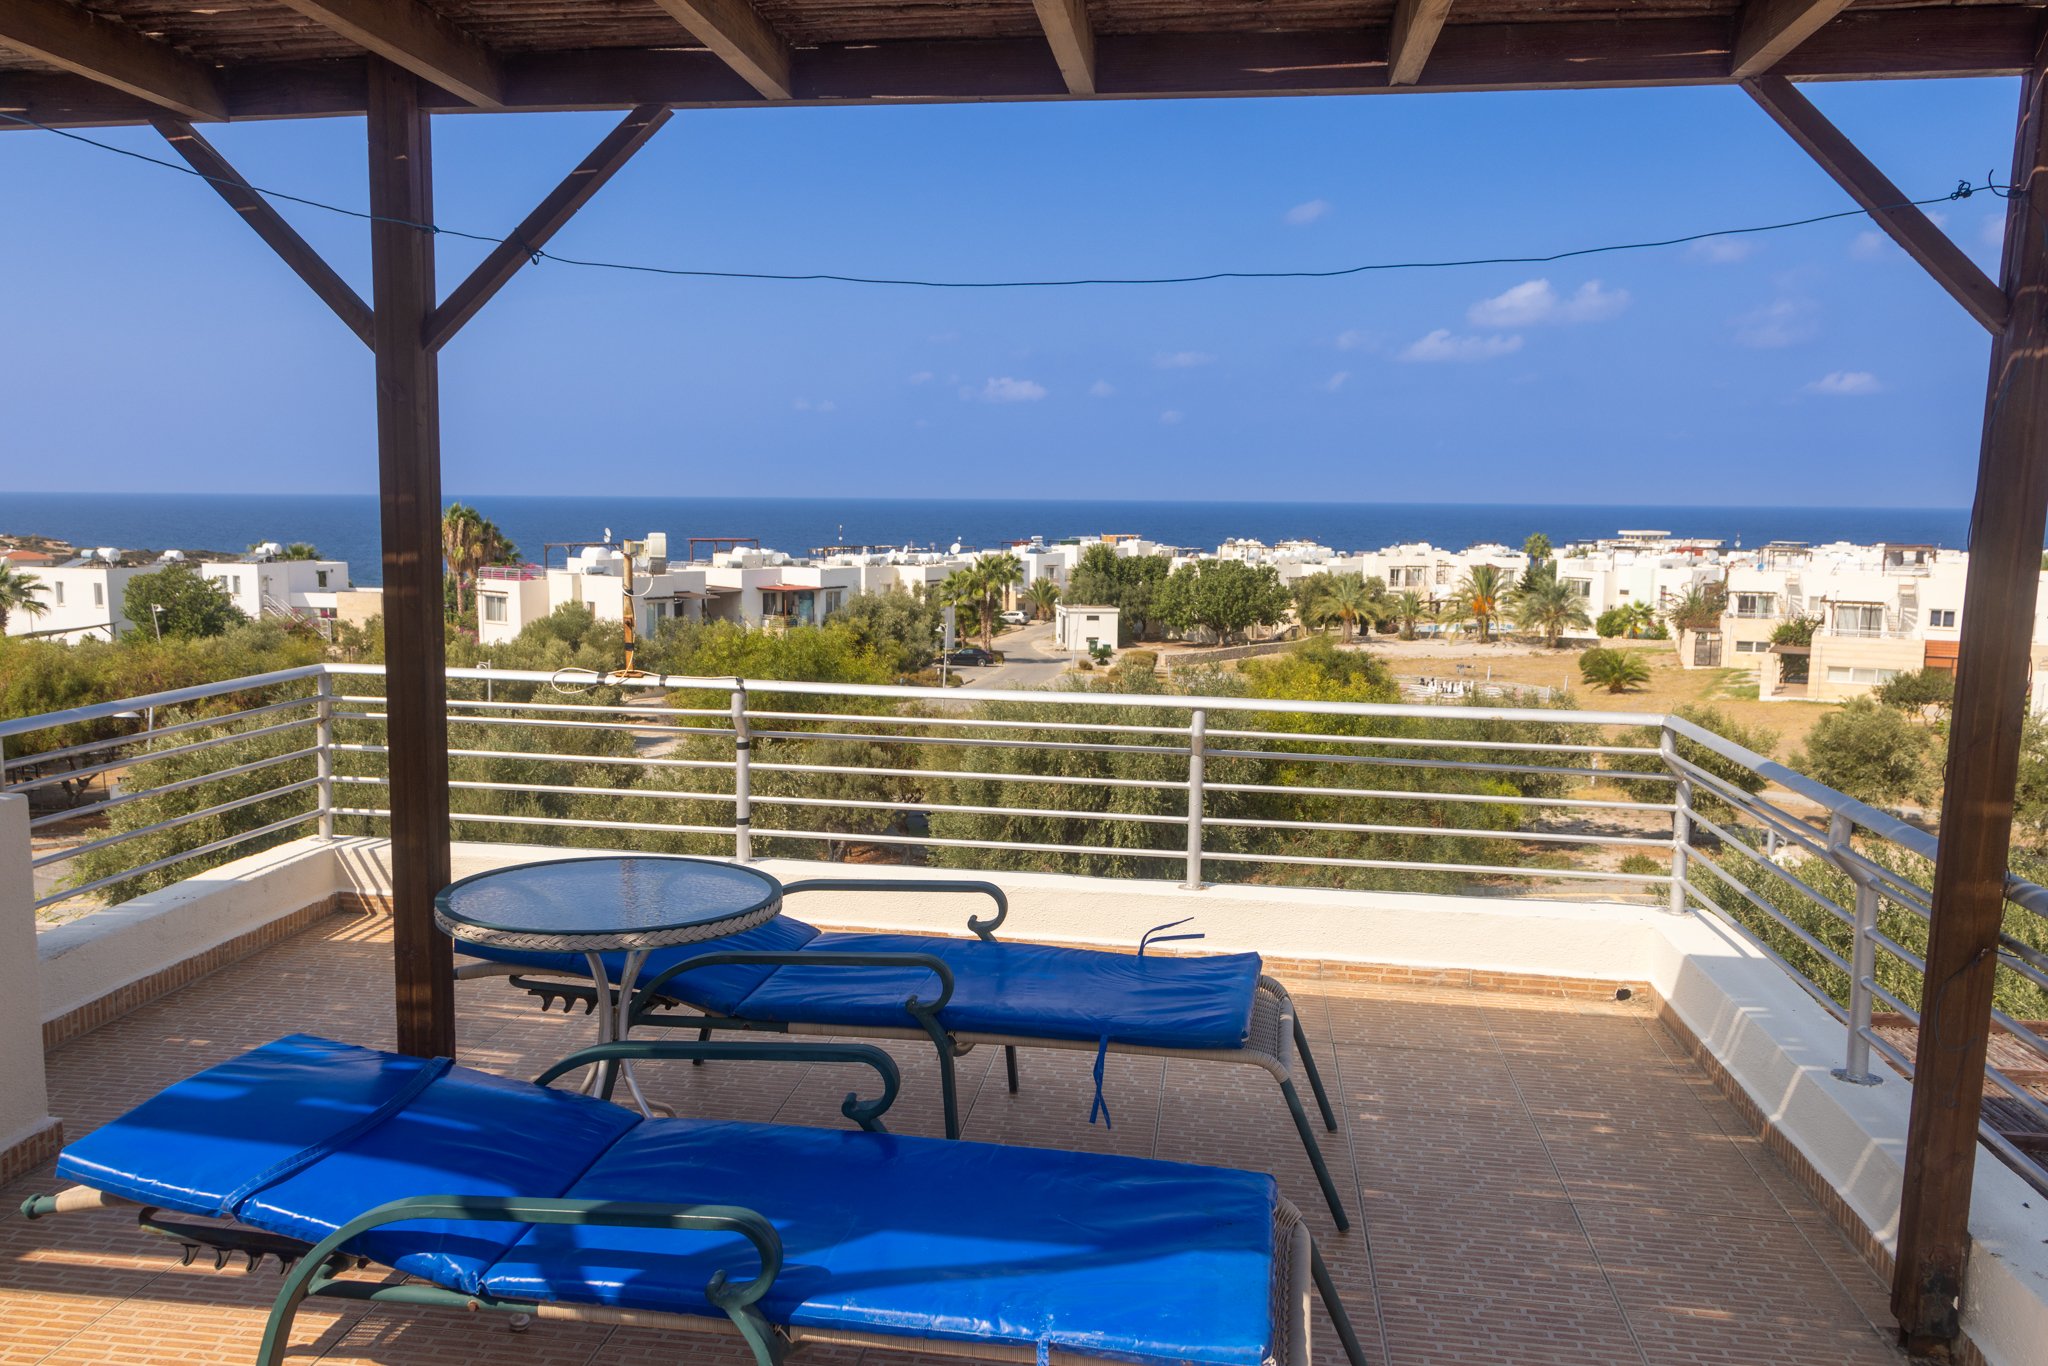 “Stunning 2 Bedroom Penthouse Resale Property in Esentepe: Your Dream Home Awaits!”, Esentepe